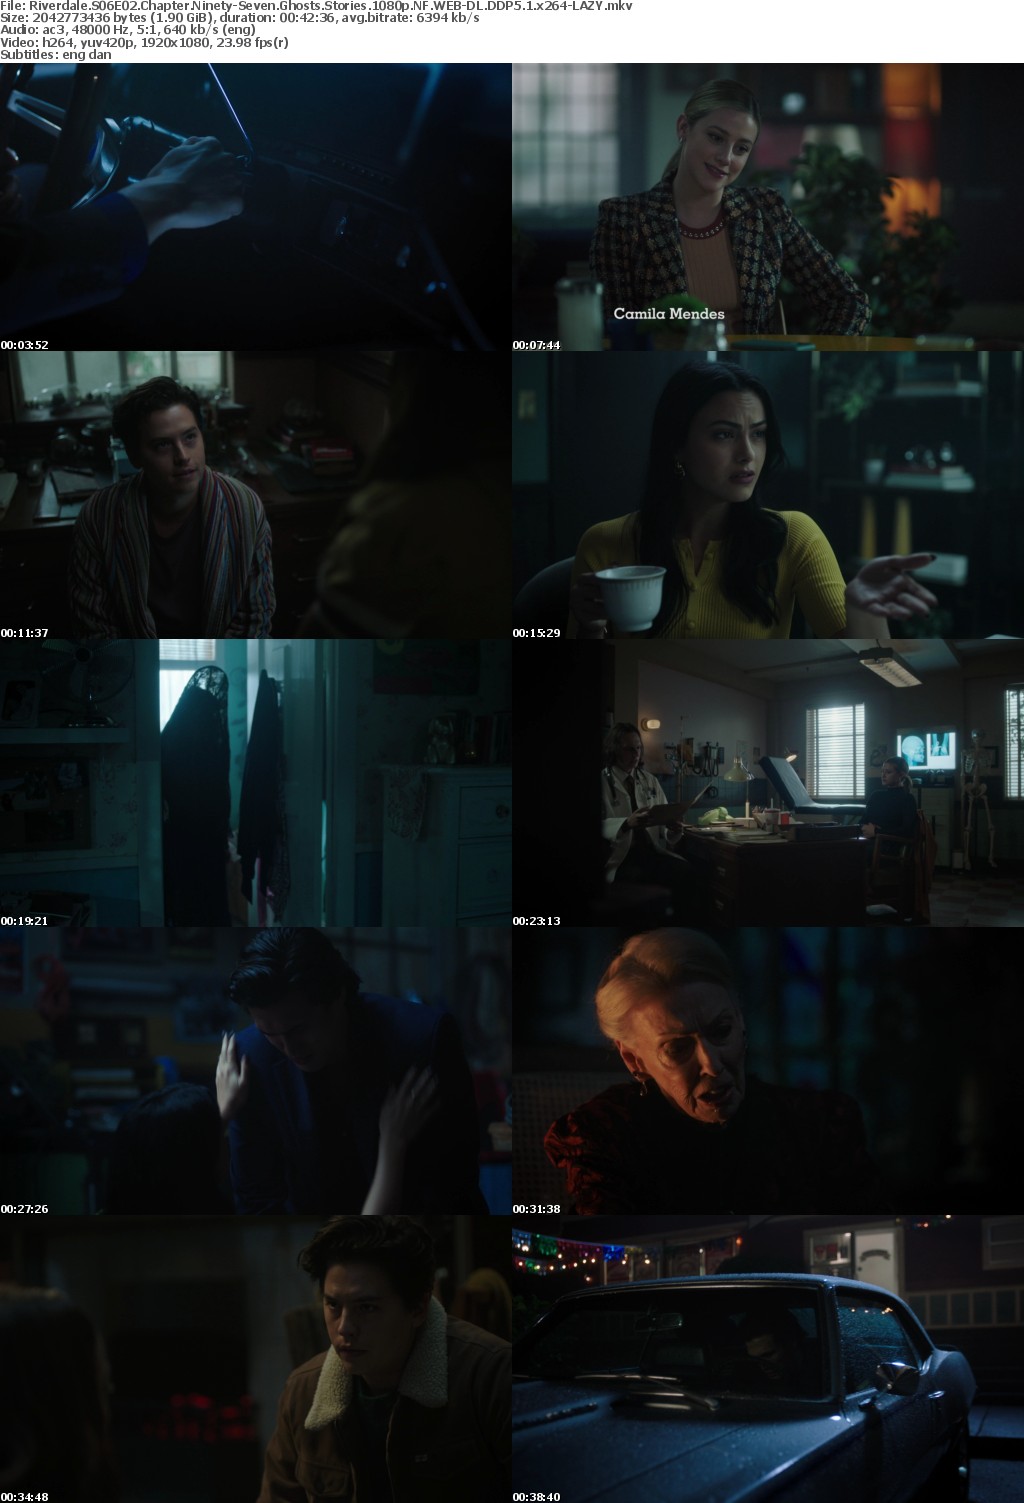 Riverdale US S06E02 Chapter Ninety-Seven Ghosts Stories 1080p NF WEBRip DDP5 1 x264-LAZY